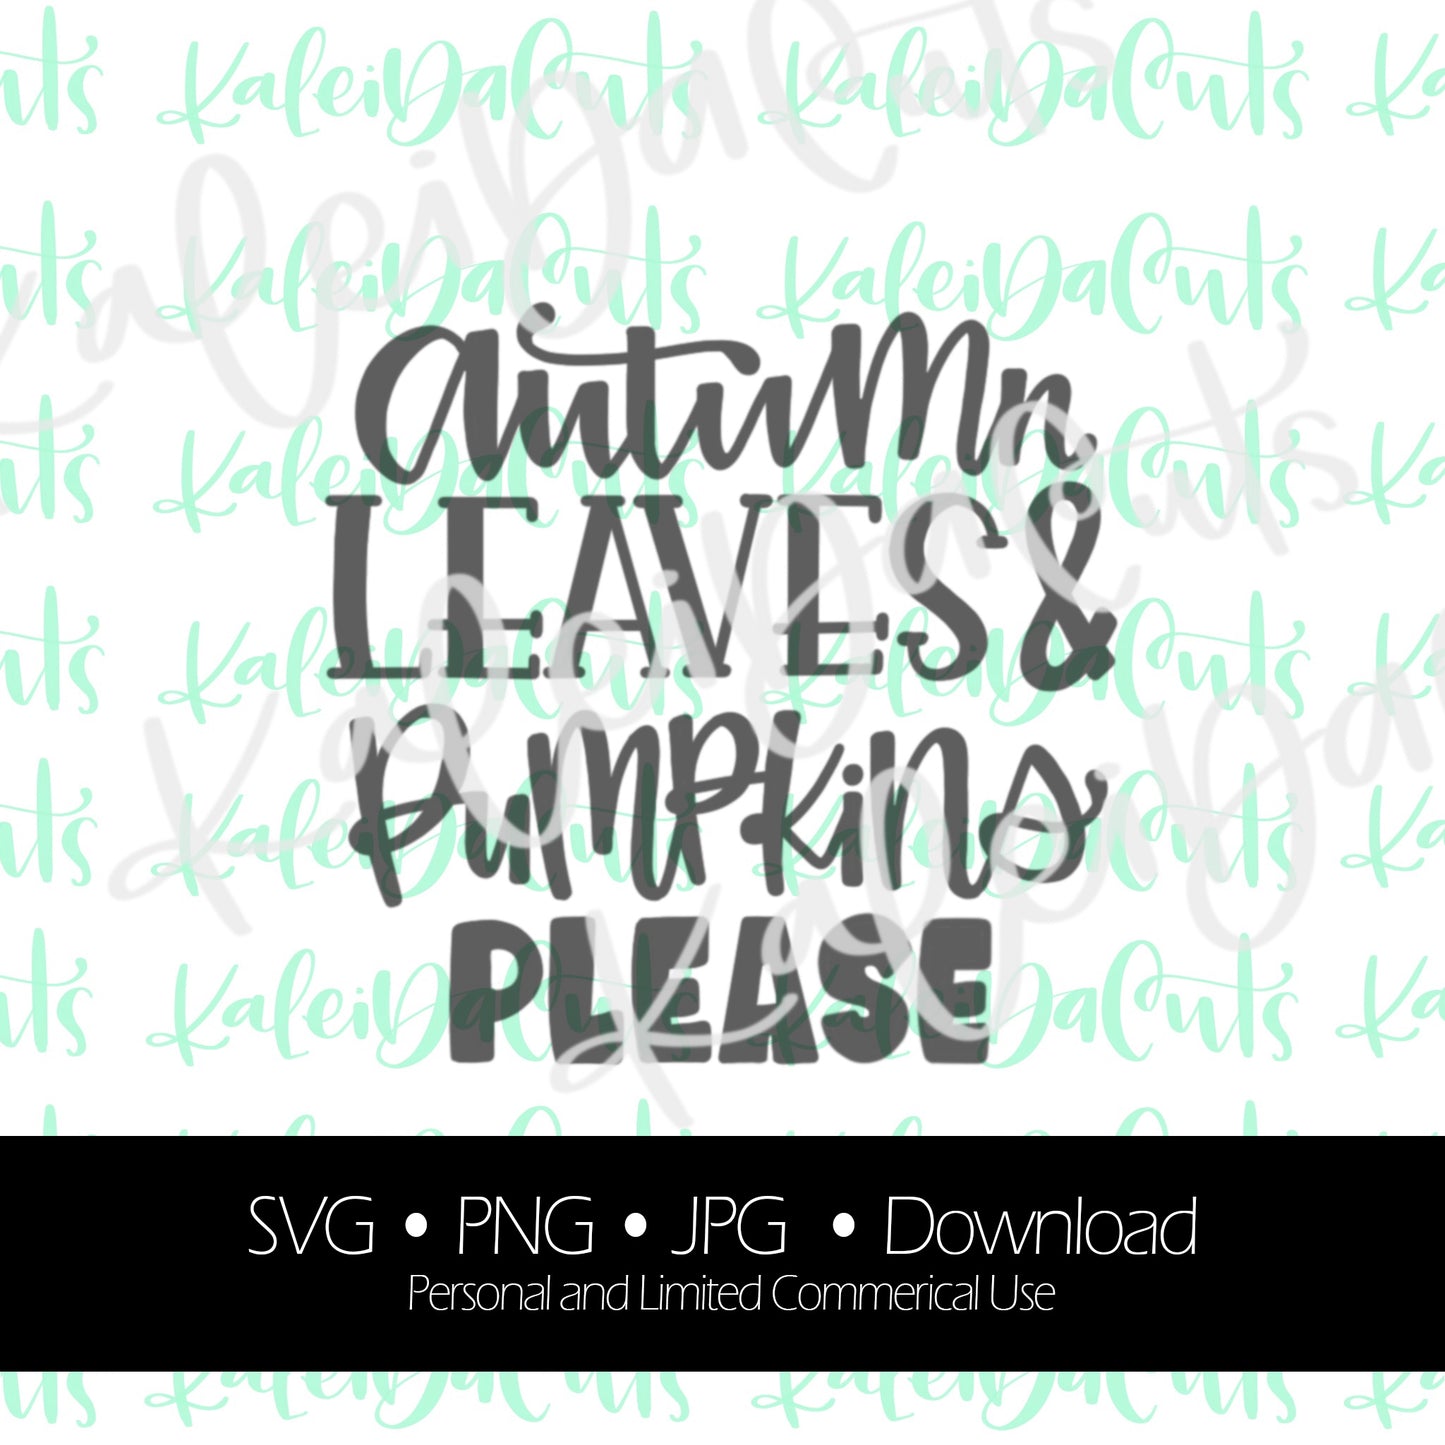 Autumn Leaves and Pumpkins Please Lettering - Digital Download.